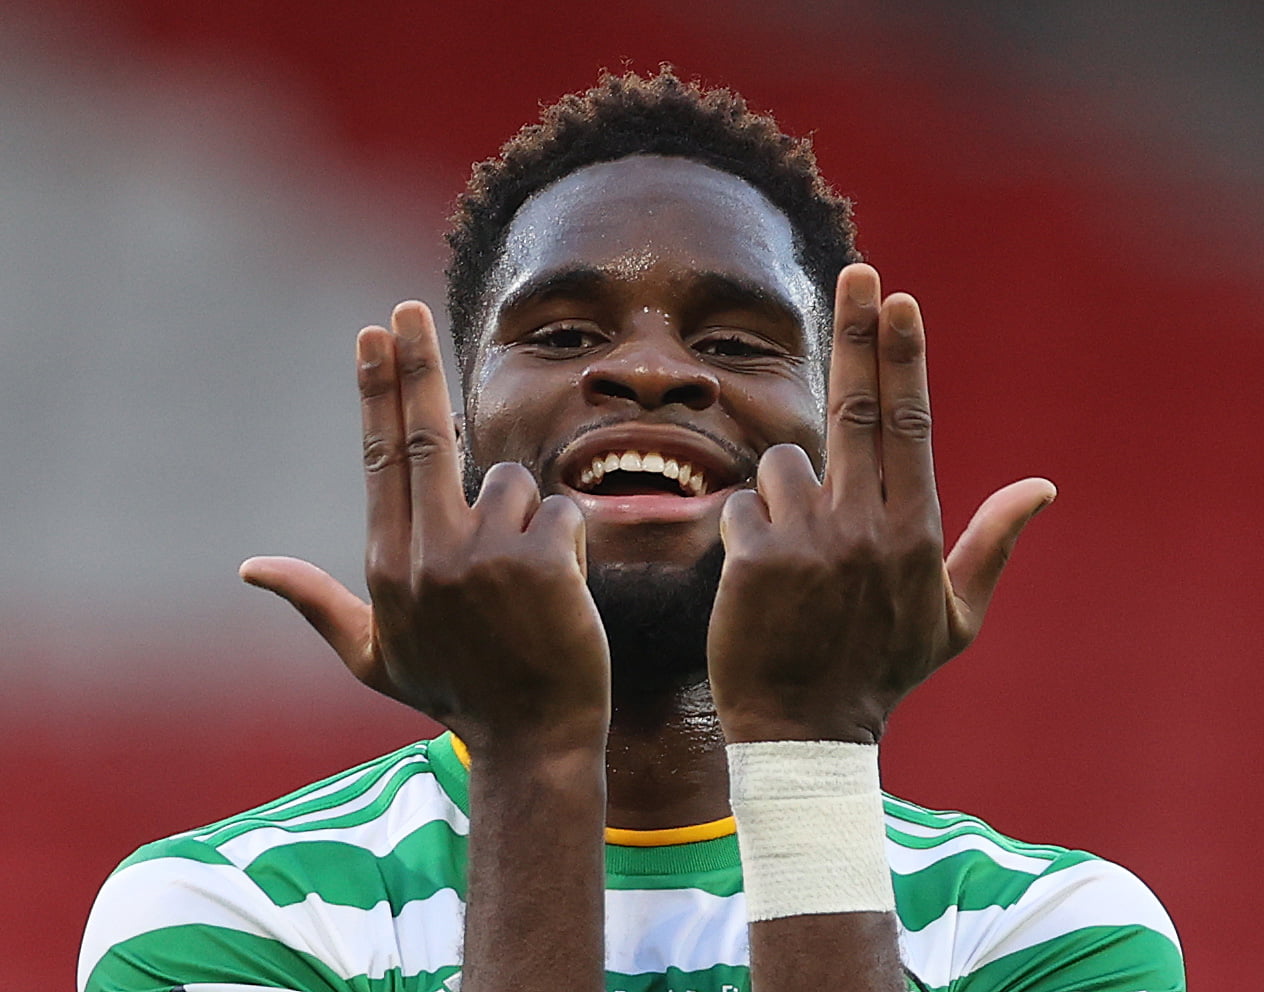 Leicester City are in pole position to recruit Odsonne Edouard who is seen in the picture